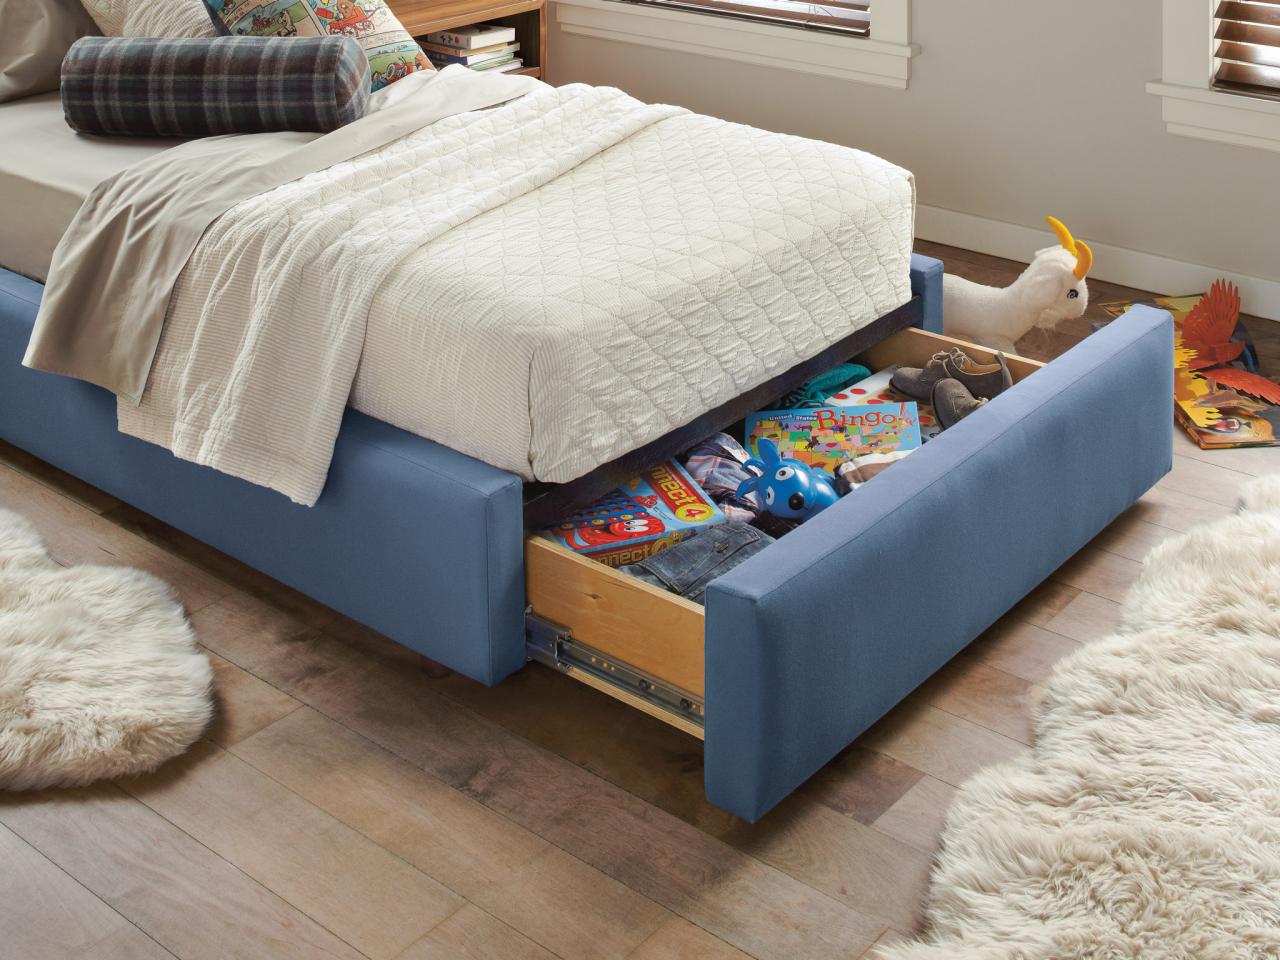 10 Beds That Look Good And Have Killer Storage Too Hgtv S